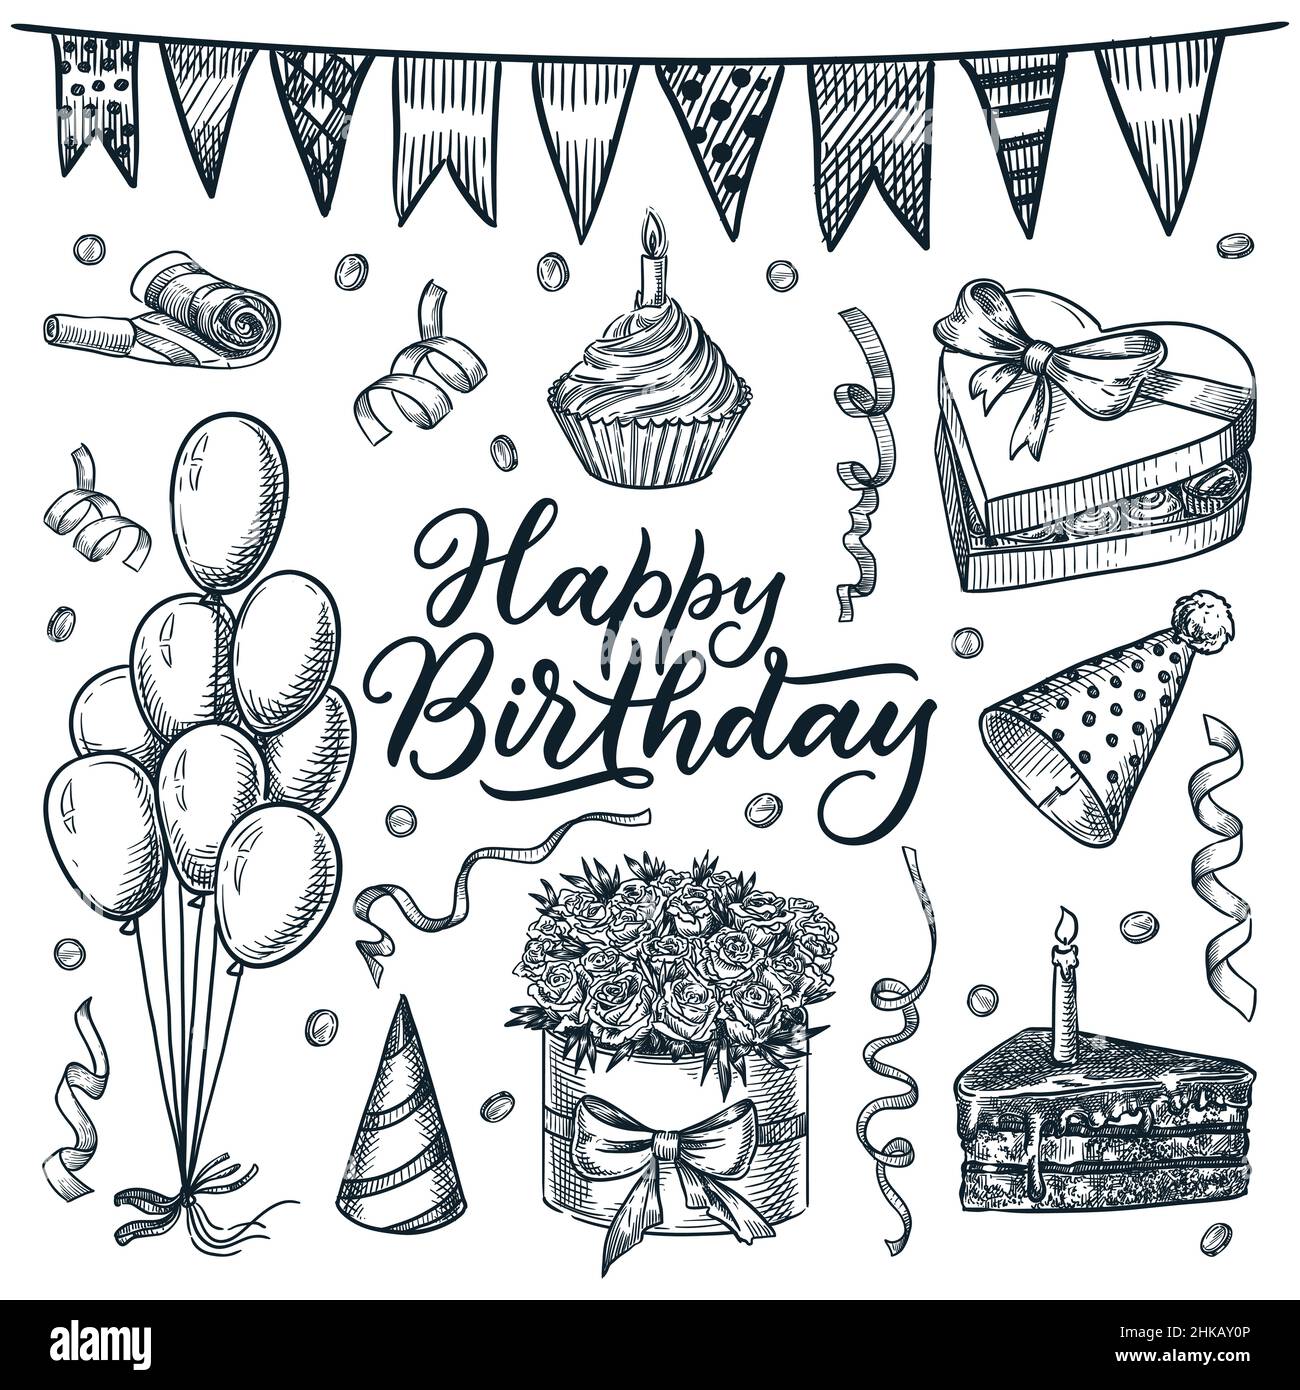 Birthday celebration background female Cut Out Stock Images  Pictures   Alamy